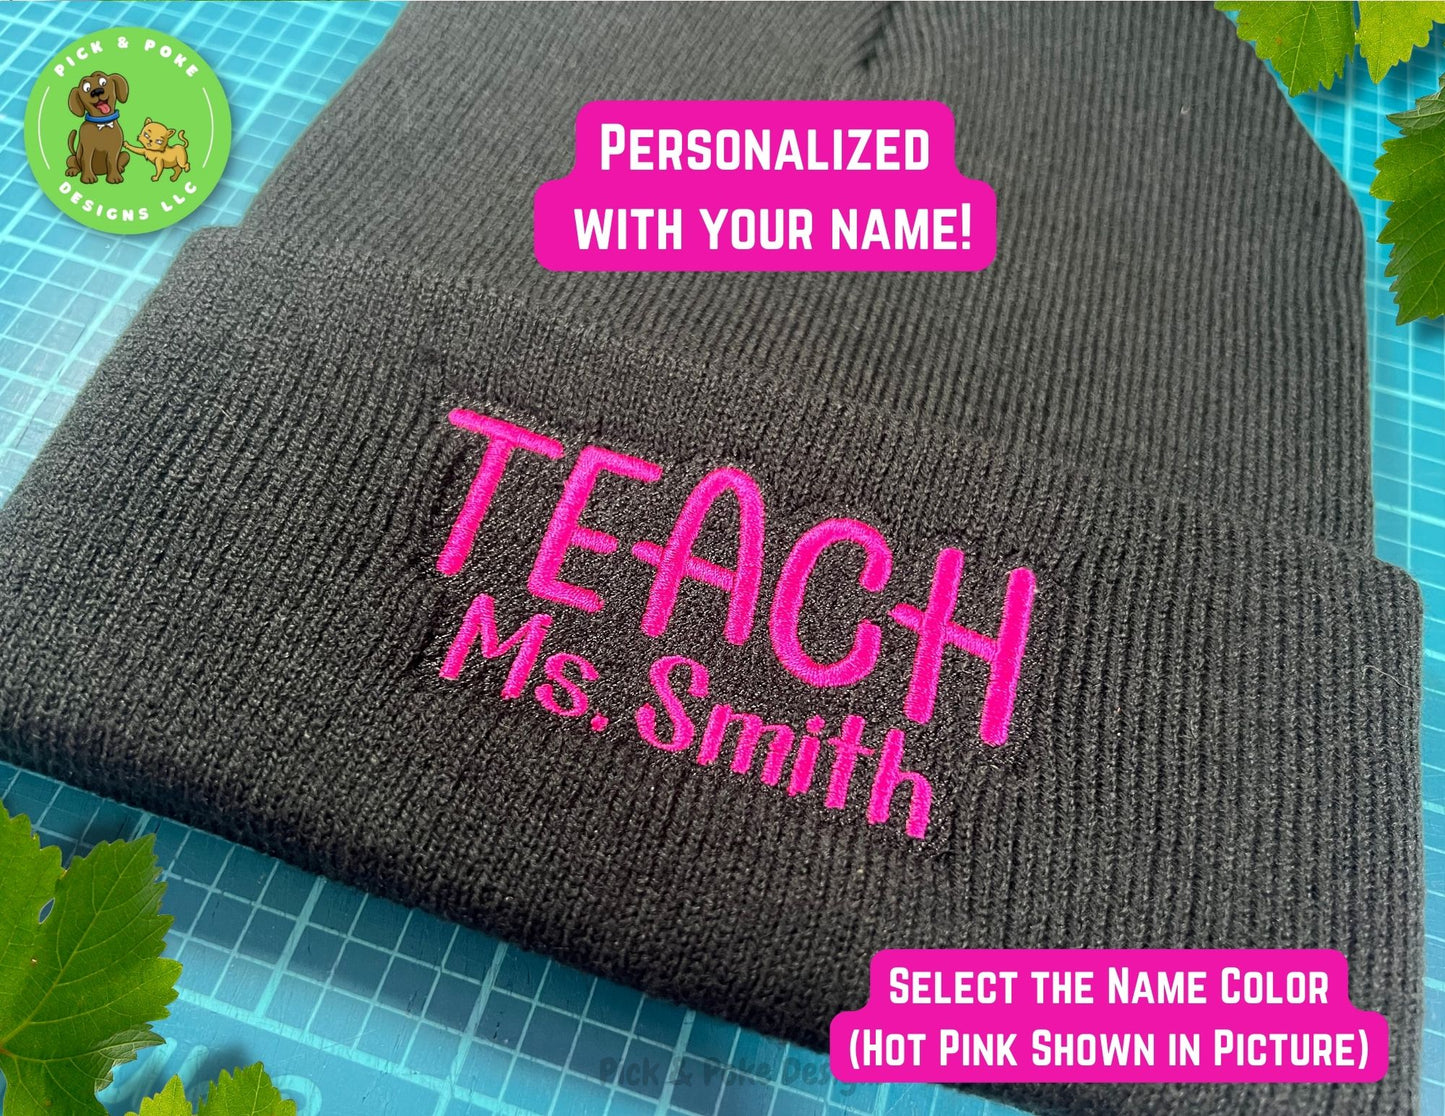 Personalized Teacher Beanie Cap | Black Knit Hat with Embroidered Name